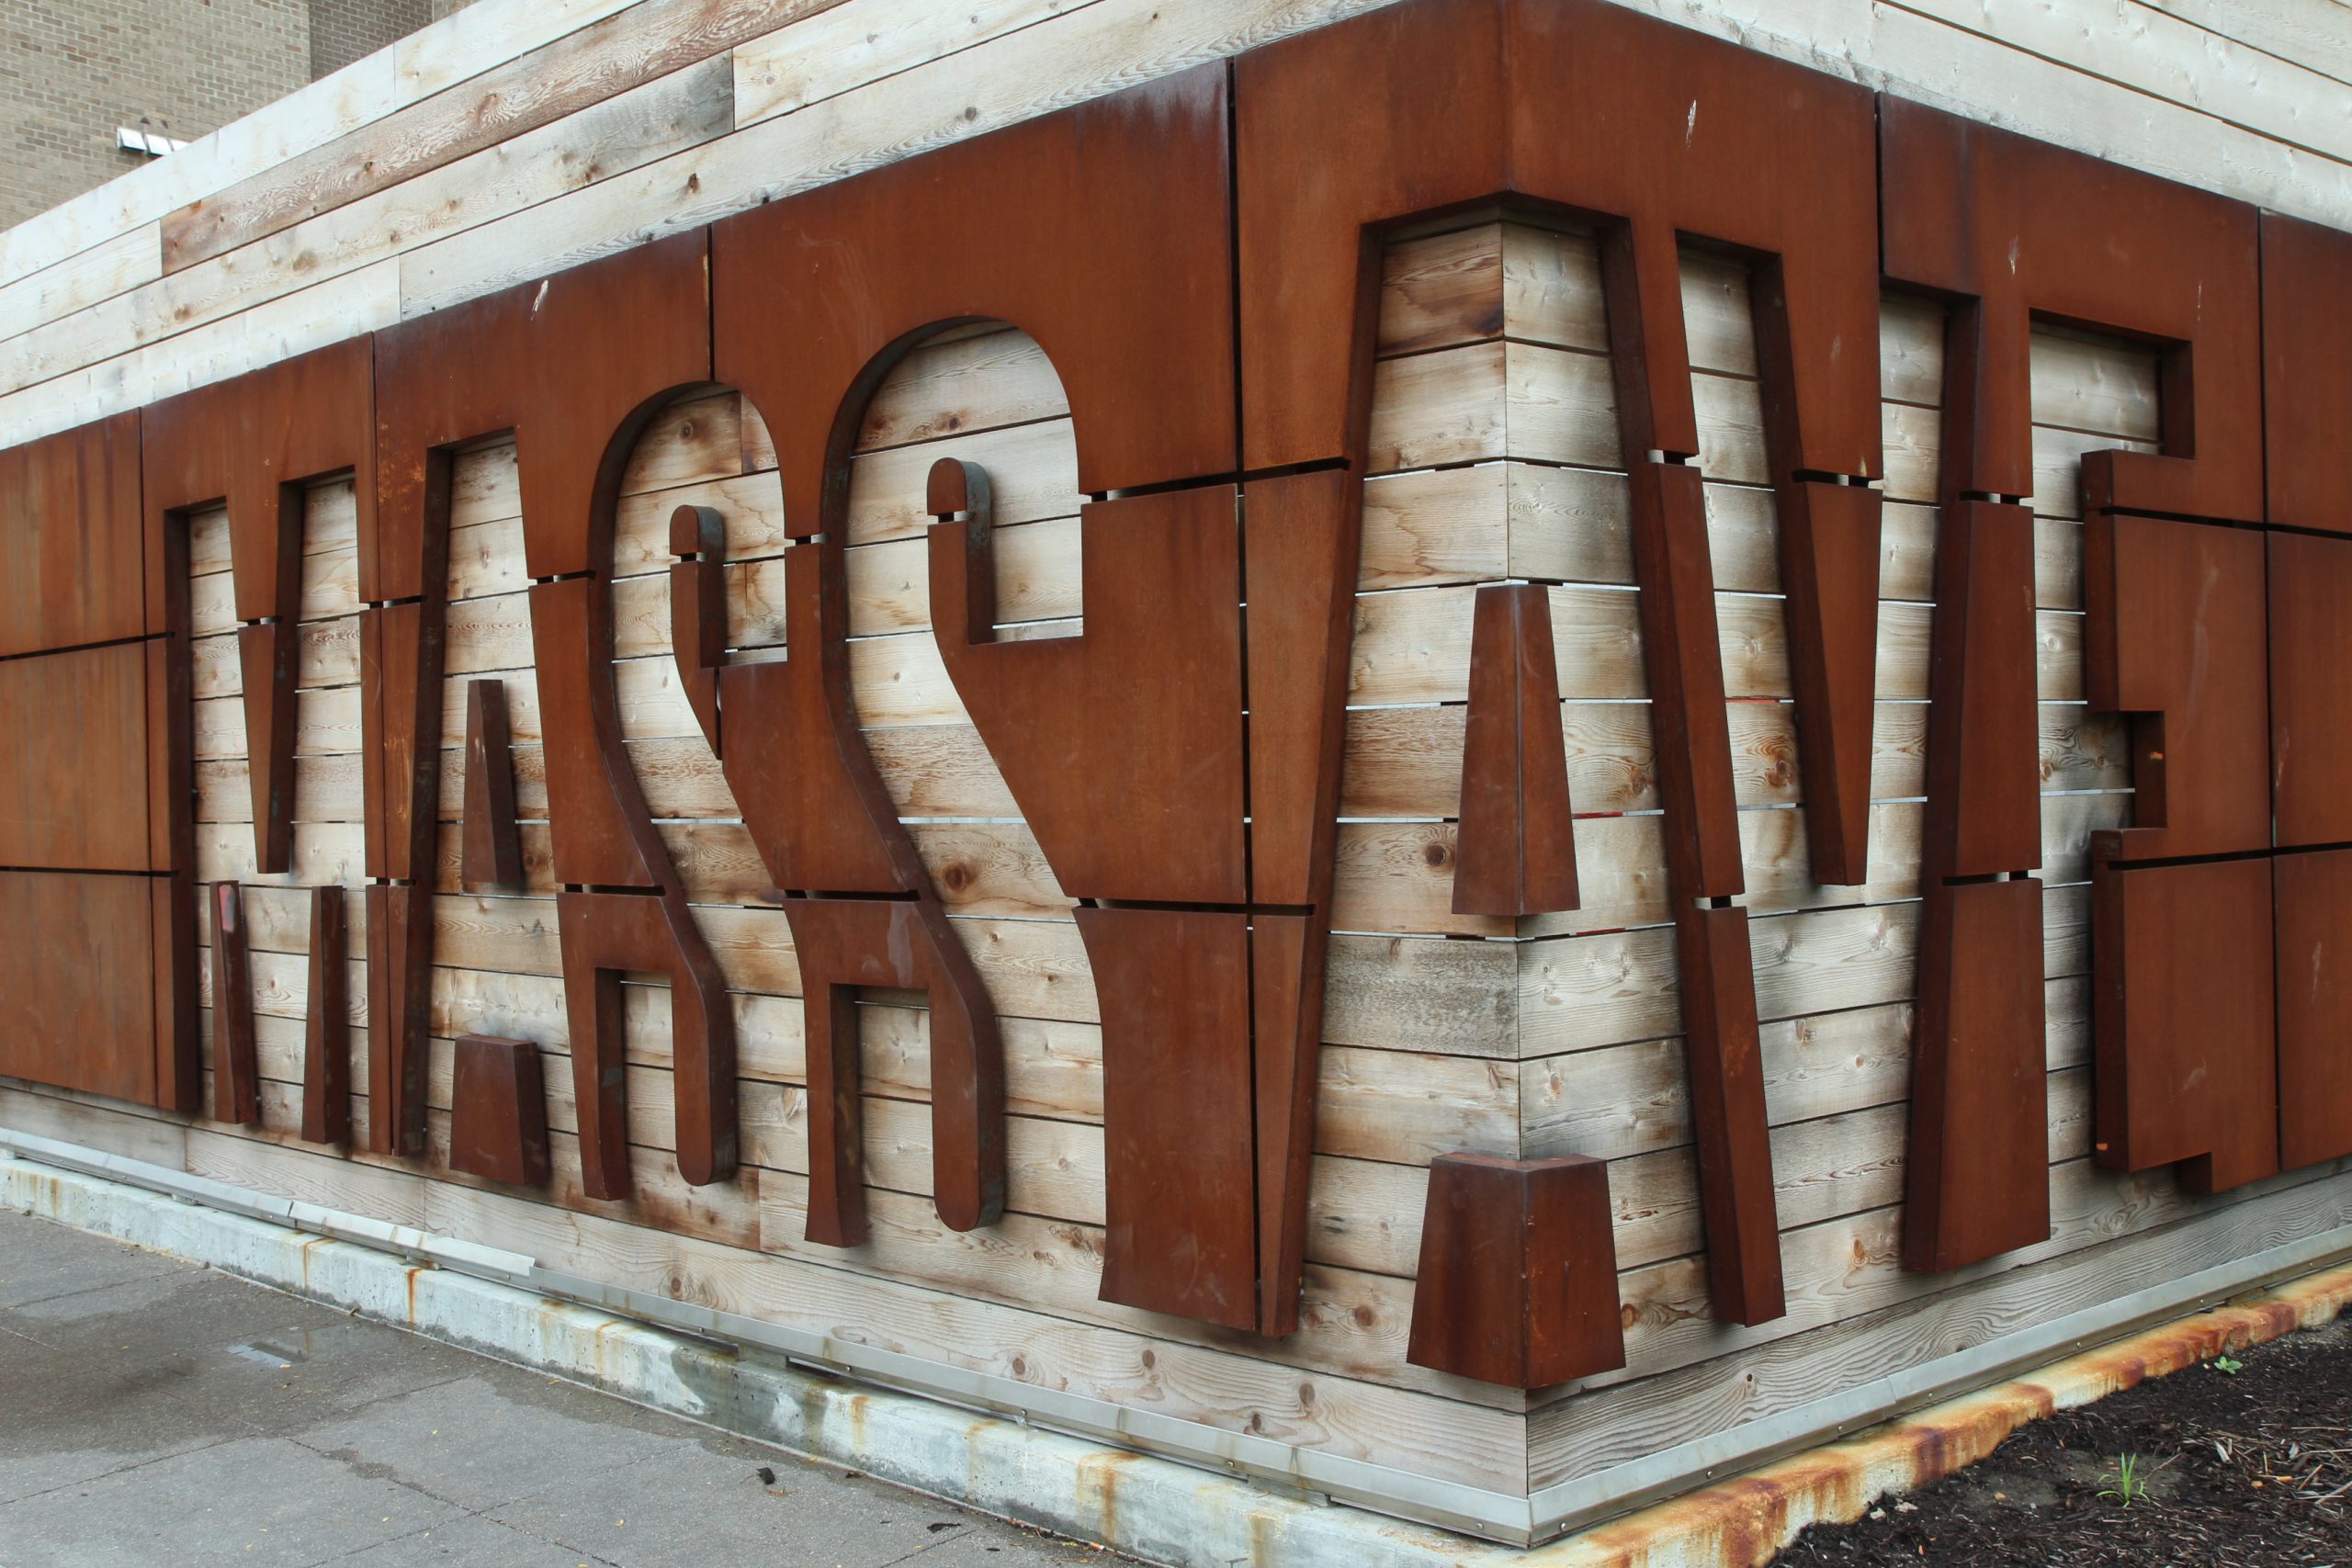 A wood-slat wall with a metal covering. The words "Mass Ave" are cut out of the metal.